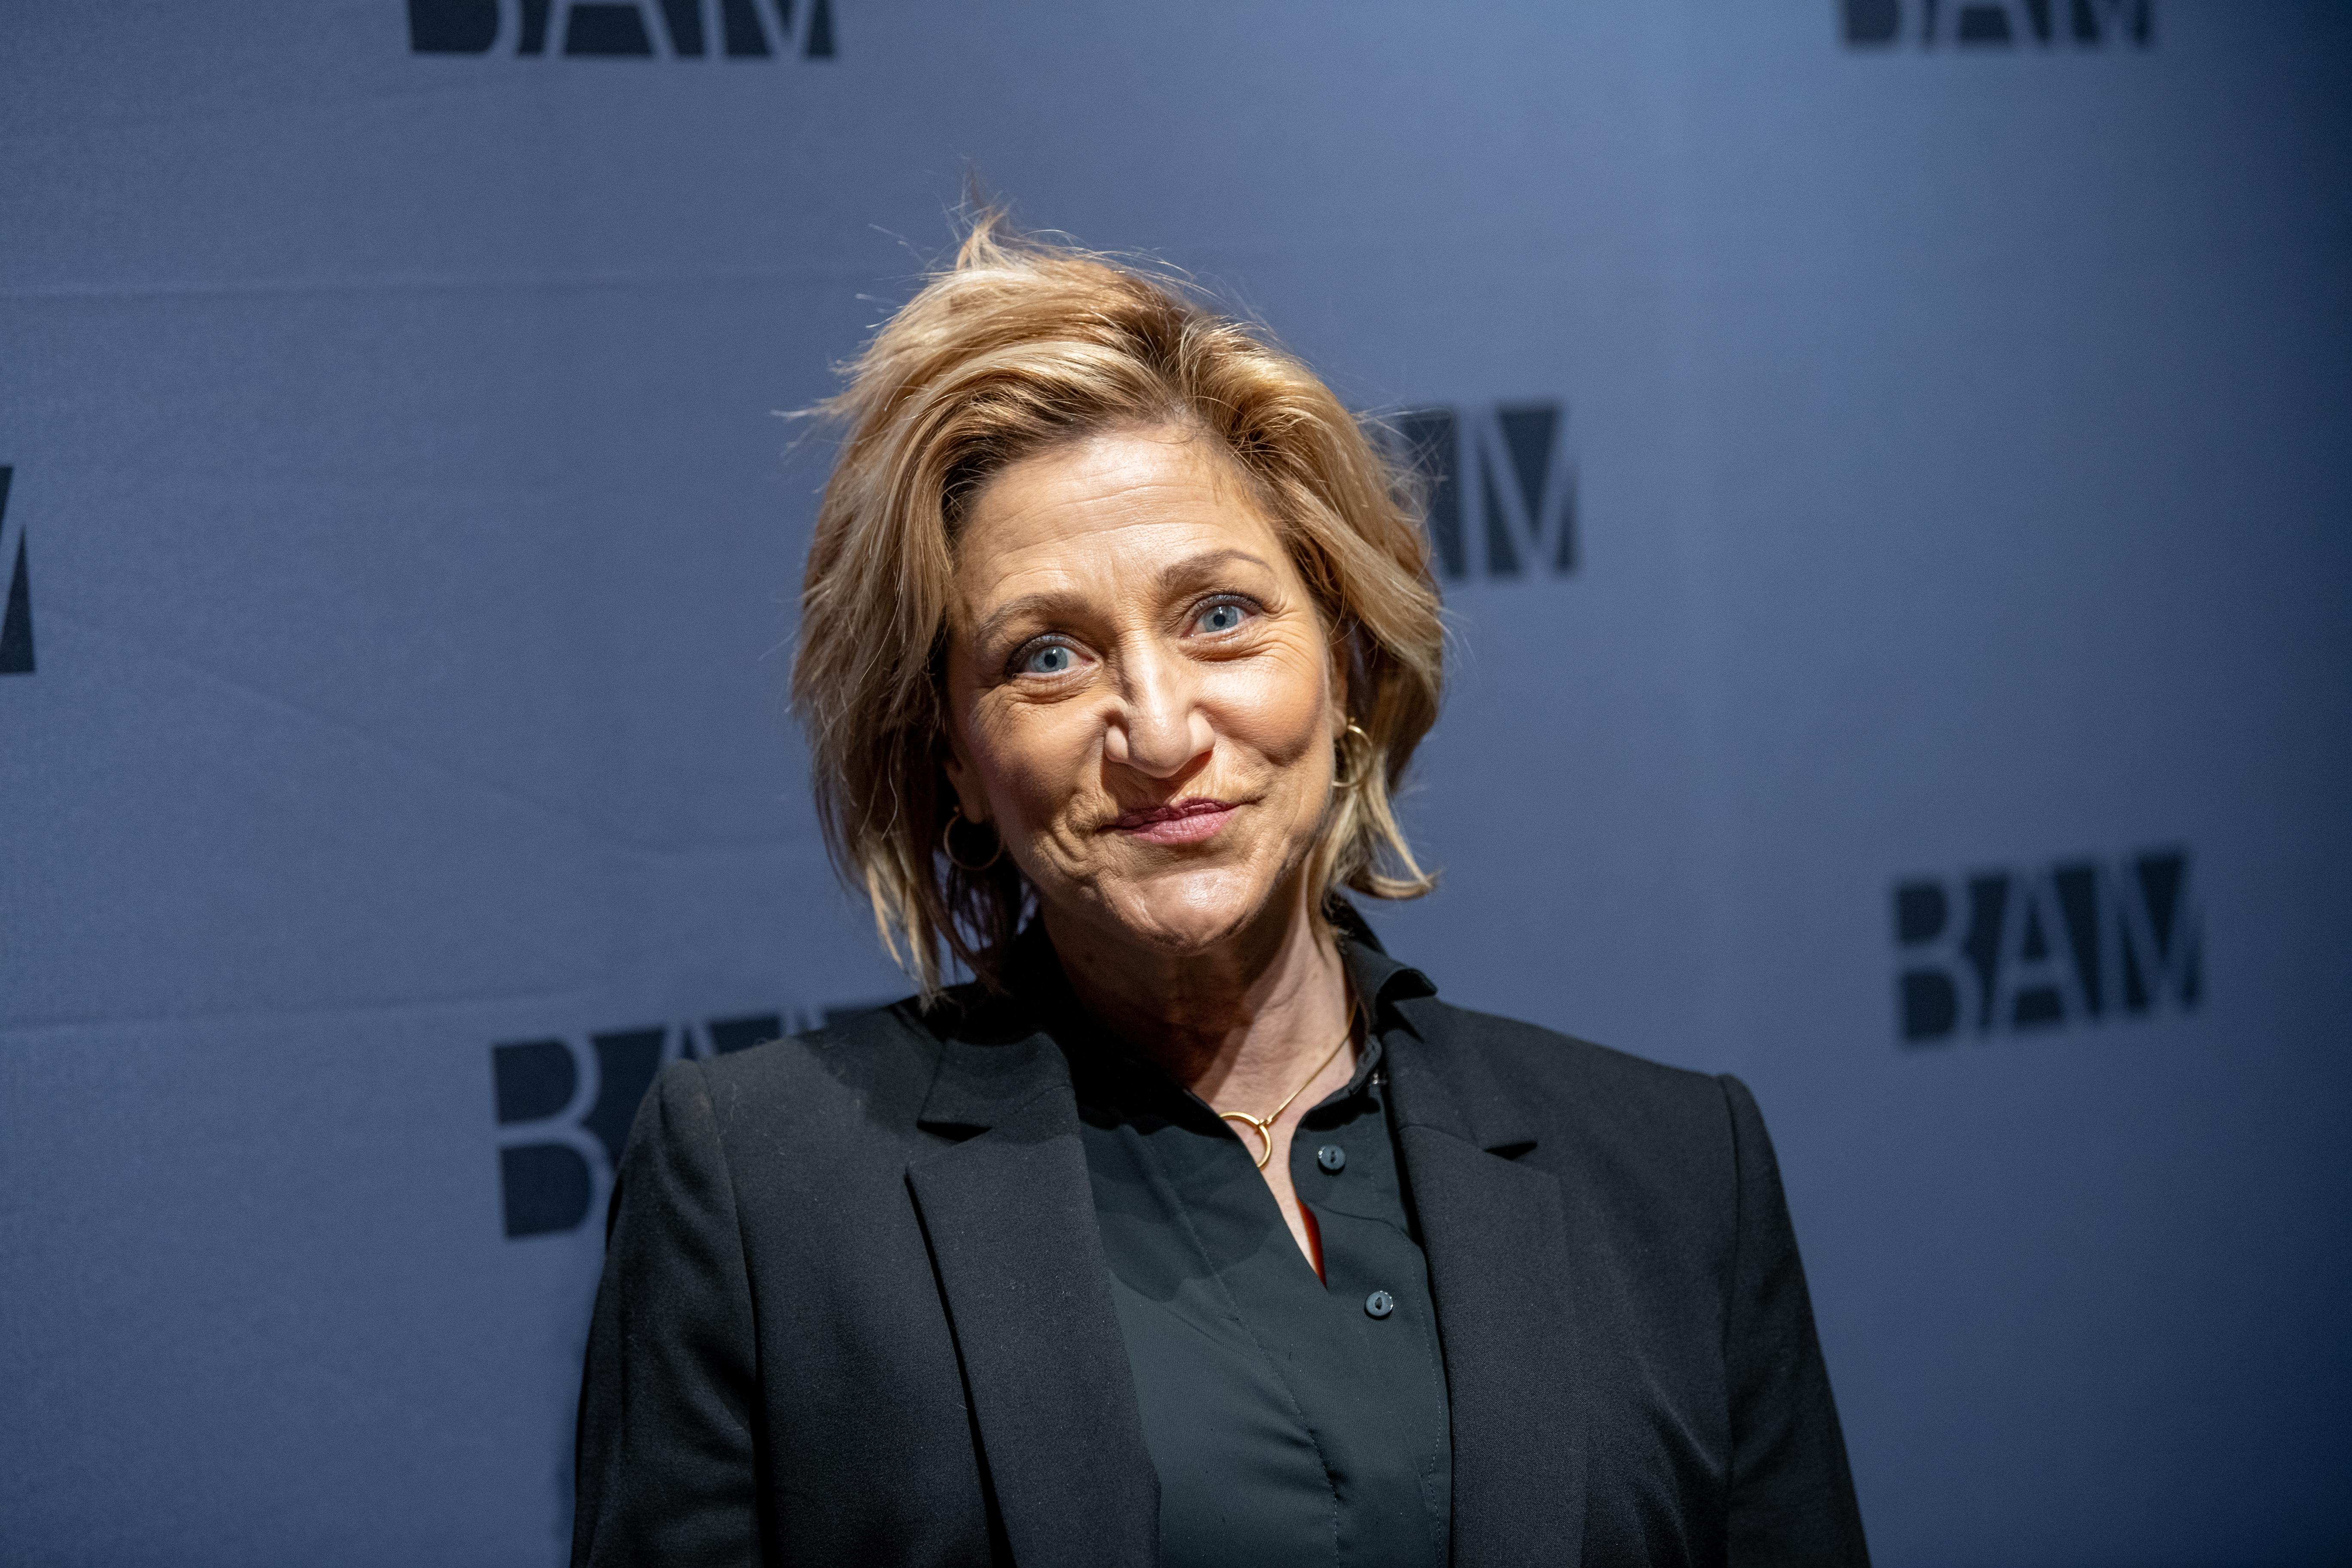 Edie falco of images Famous Breast